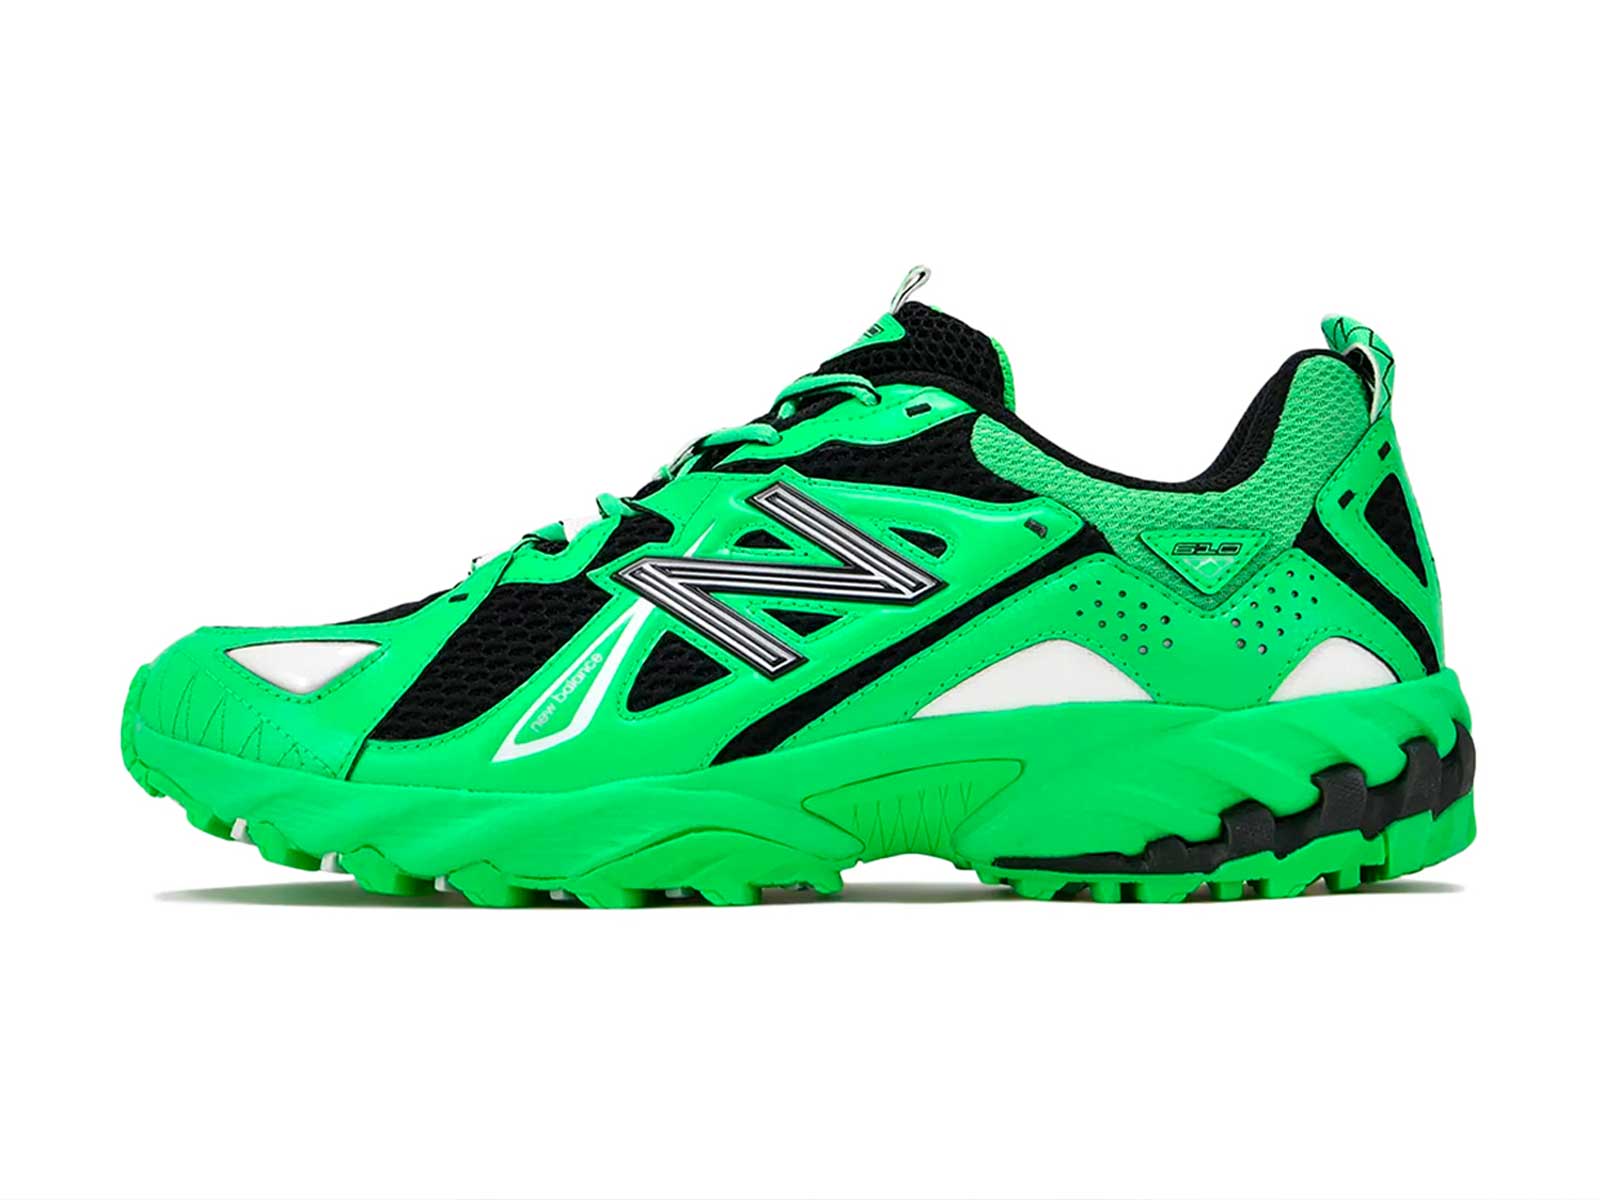 The next New Balance 610 arrives in “Bright Green”